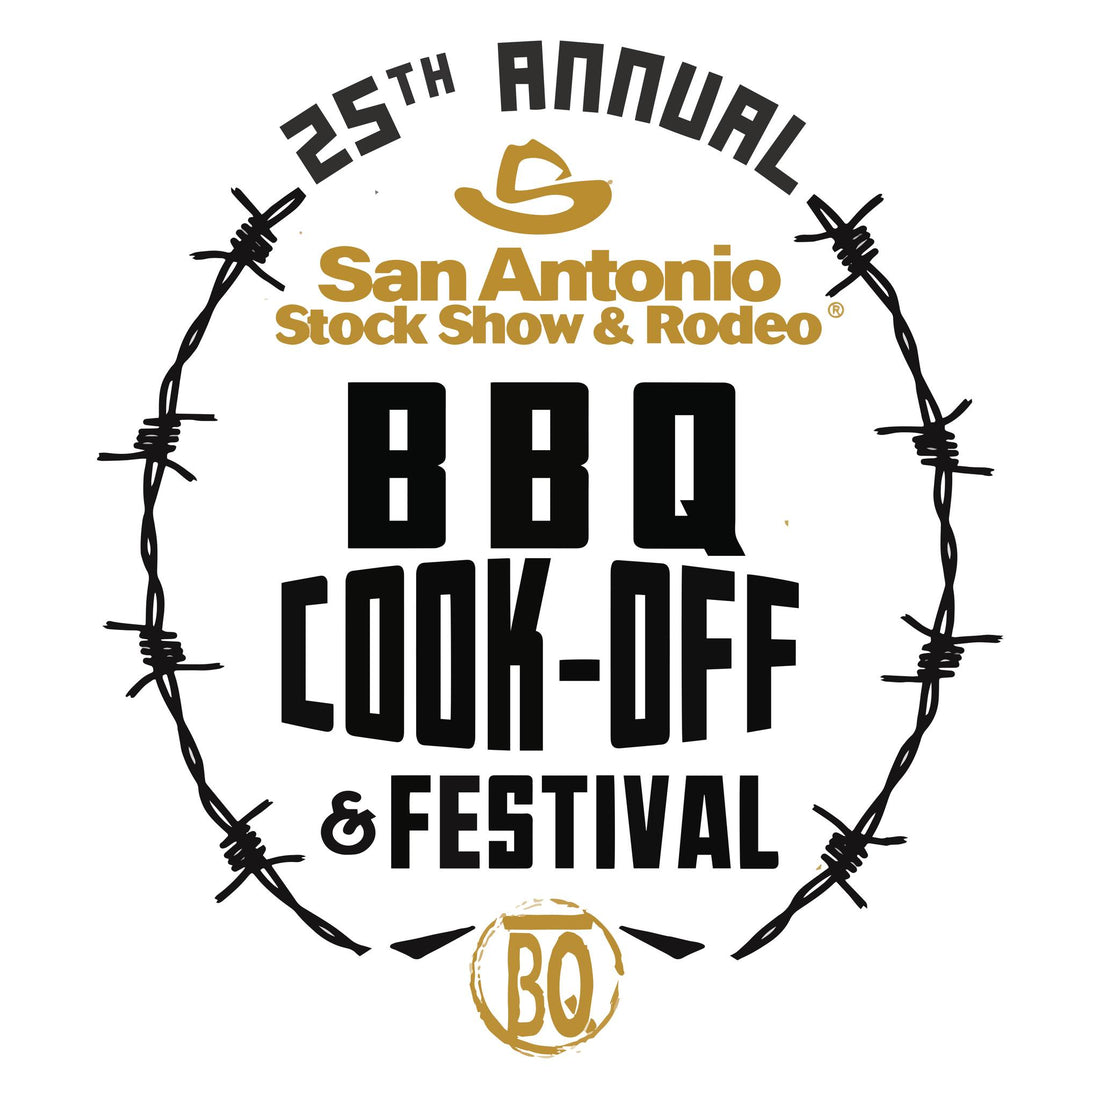 San Antonio Stock Show & Rodeo BBQ Cookoff 1/28 - 1/29 (10 am -11:45 pm)